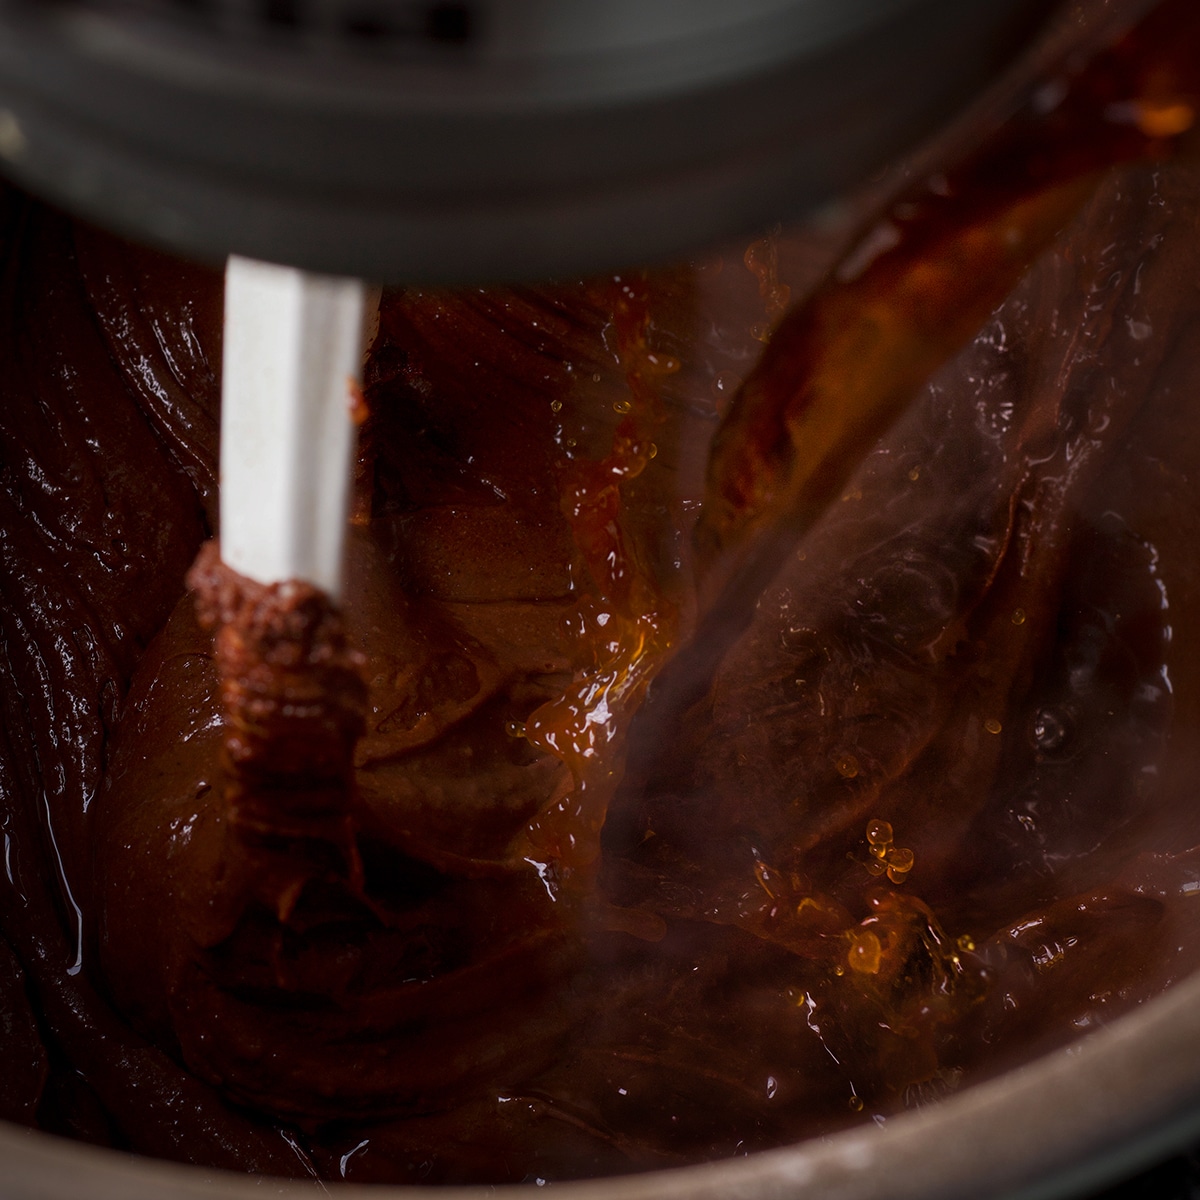 Pouring hot coffee into chocolate cake batter while an electric mixer blends it in.